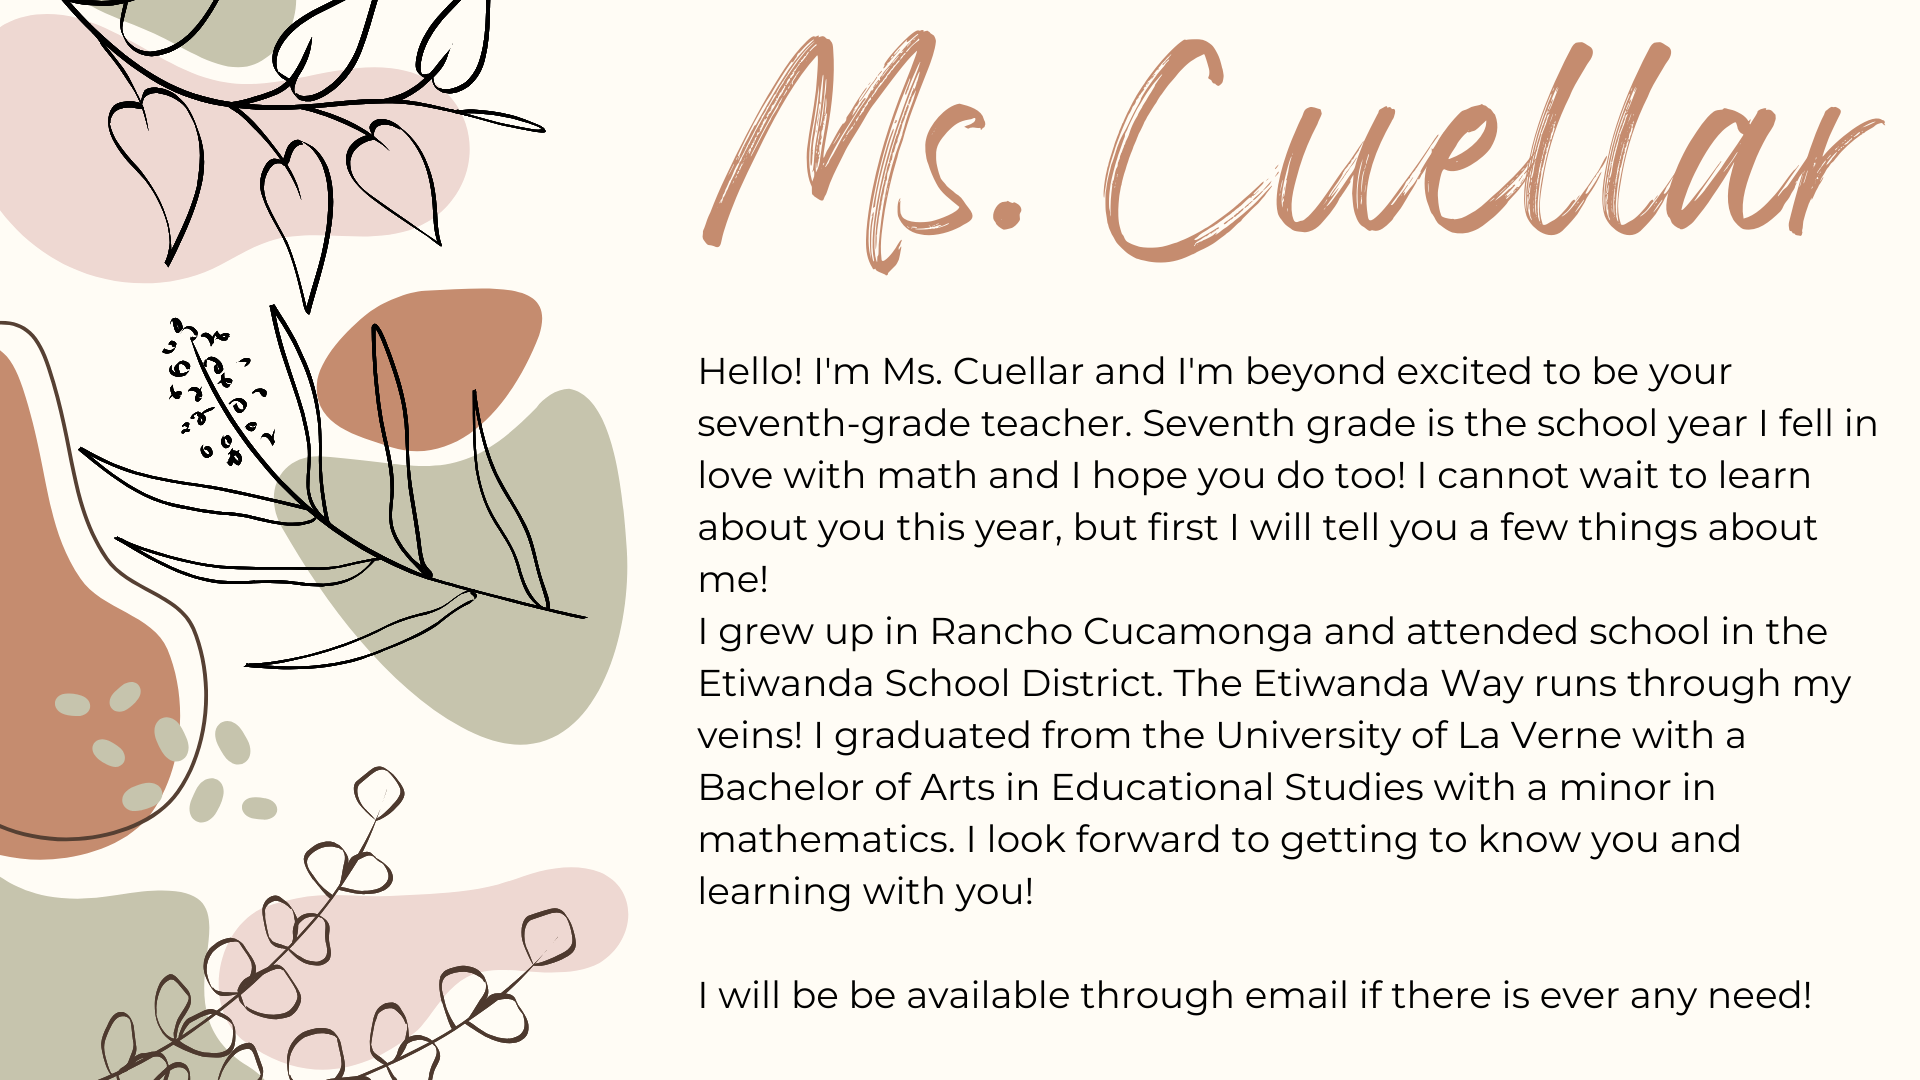 Hello! I'm Ms. Cuellar and I'm beyond excited to be your seventh-grade teacher. Seventh grade is the school year I fell in love with math which makes it fitting that I will be teaching seventh grade math and science. I cannot wait to learn about you this year, but first I will tell you a few things about me!  I grew up in Rancho Cucamonga and attended school in the Etiwanda School District. The Etiwanda Way runs through my veins! I graduated from the University of La Verne with a Bachelor of Arts in Educational Studies with a minor in mathematics. I look forward to getting to know you and learning with you!  I will be be available through email if there is ever any need!